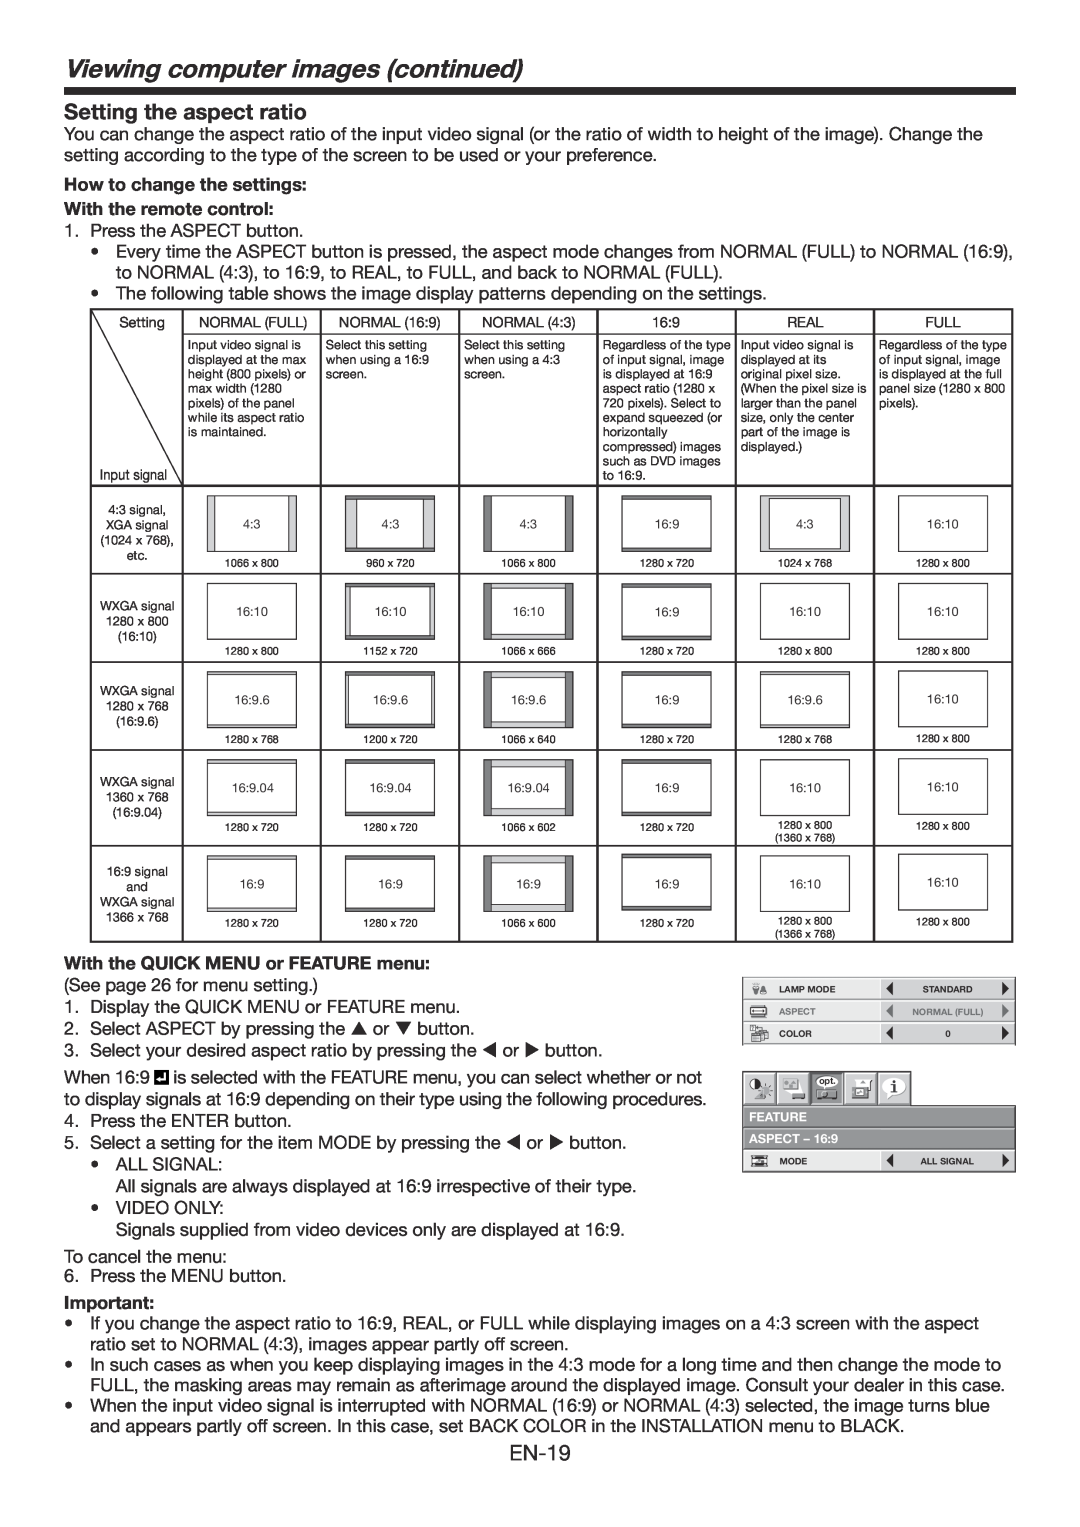 Mitsumi electronic WD3300U user manual Setting the aspect ratio, Viewing computer images continued, EN-19 